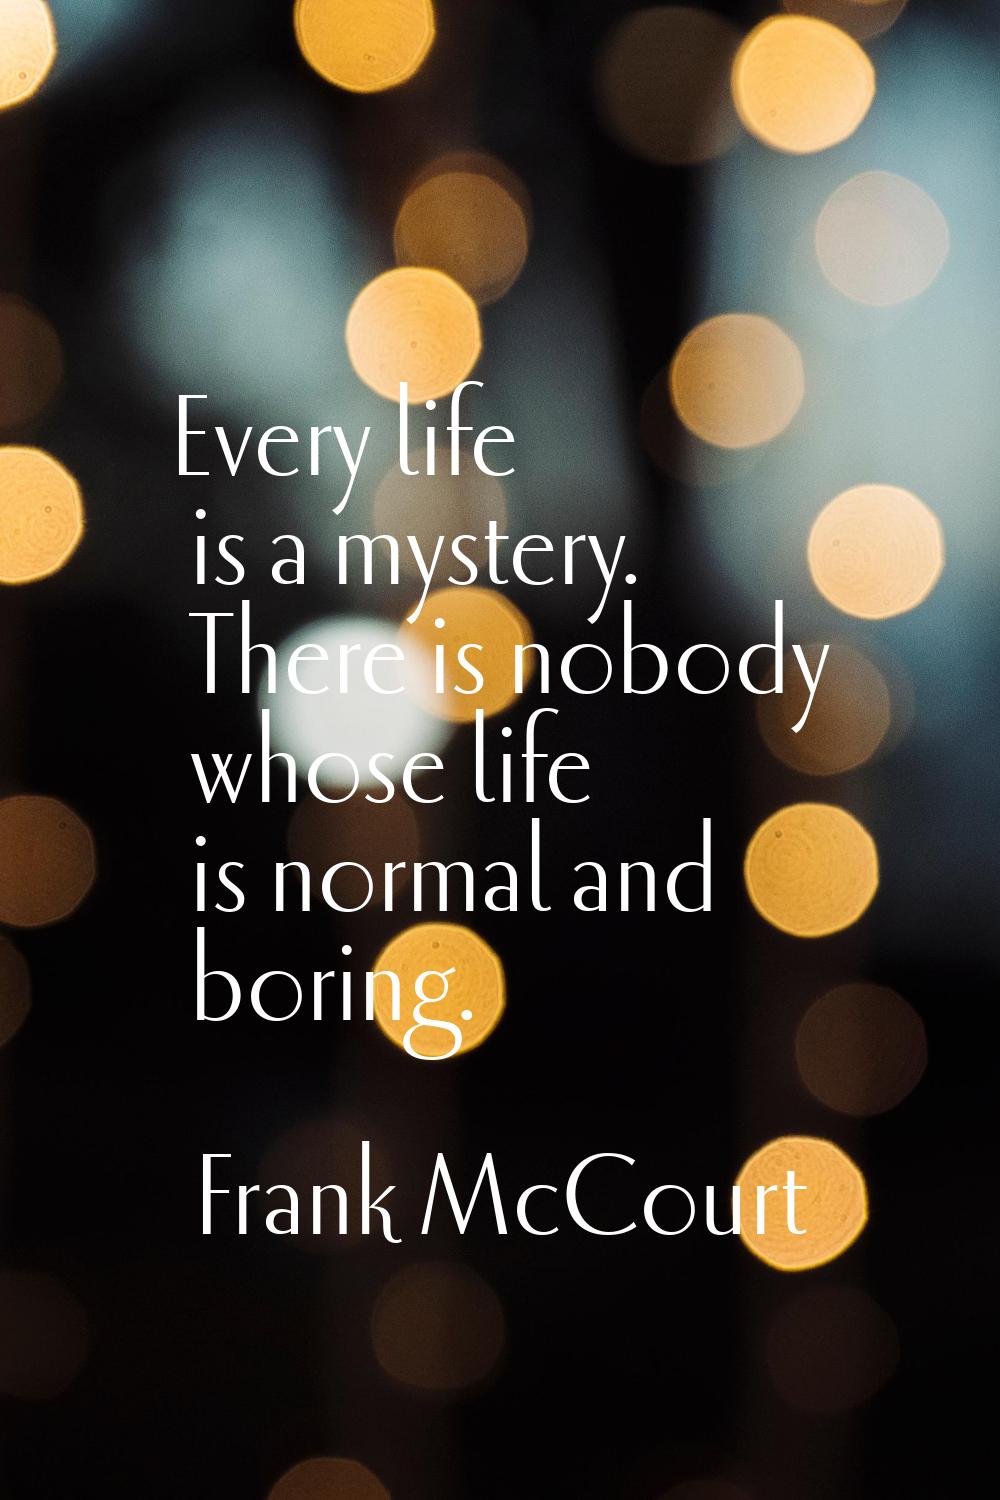 Every life is a mystery. There is nobody whose life is normal and boring.